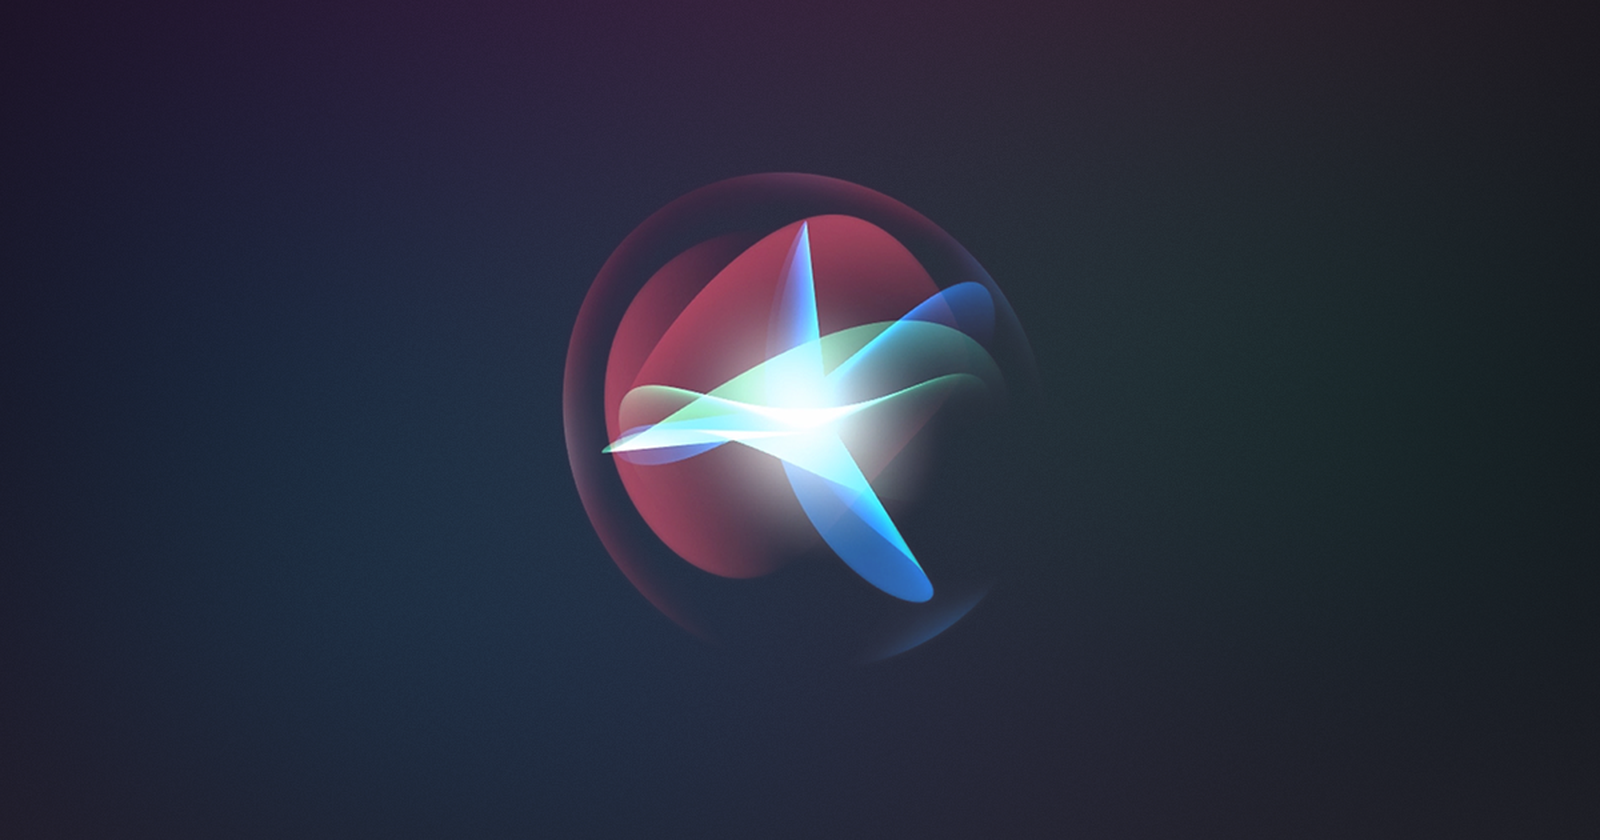 Starting with iOS 15, iPadOS 15, macOS Monterey, and watchOS 8, Apple will cut back on integration between Siri and third-party apps, drastically redu